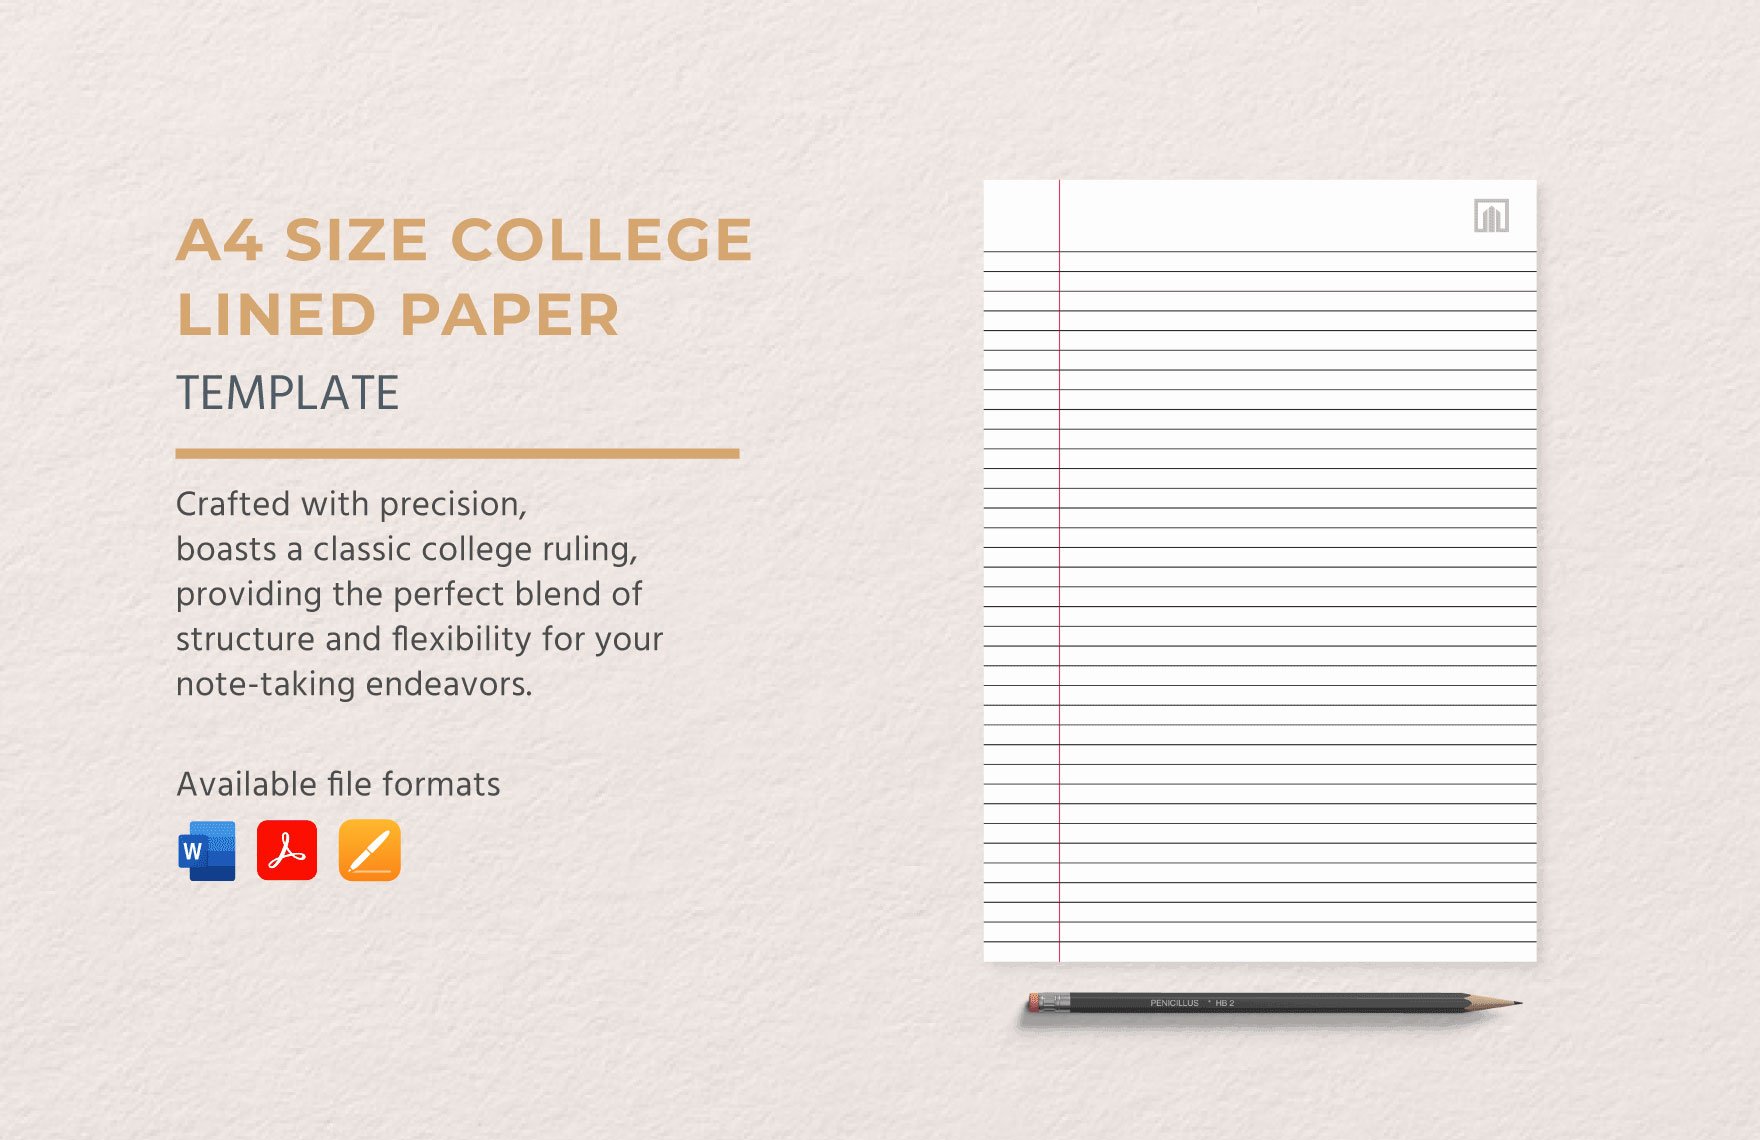 A4 Size College Lined Paper Template